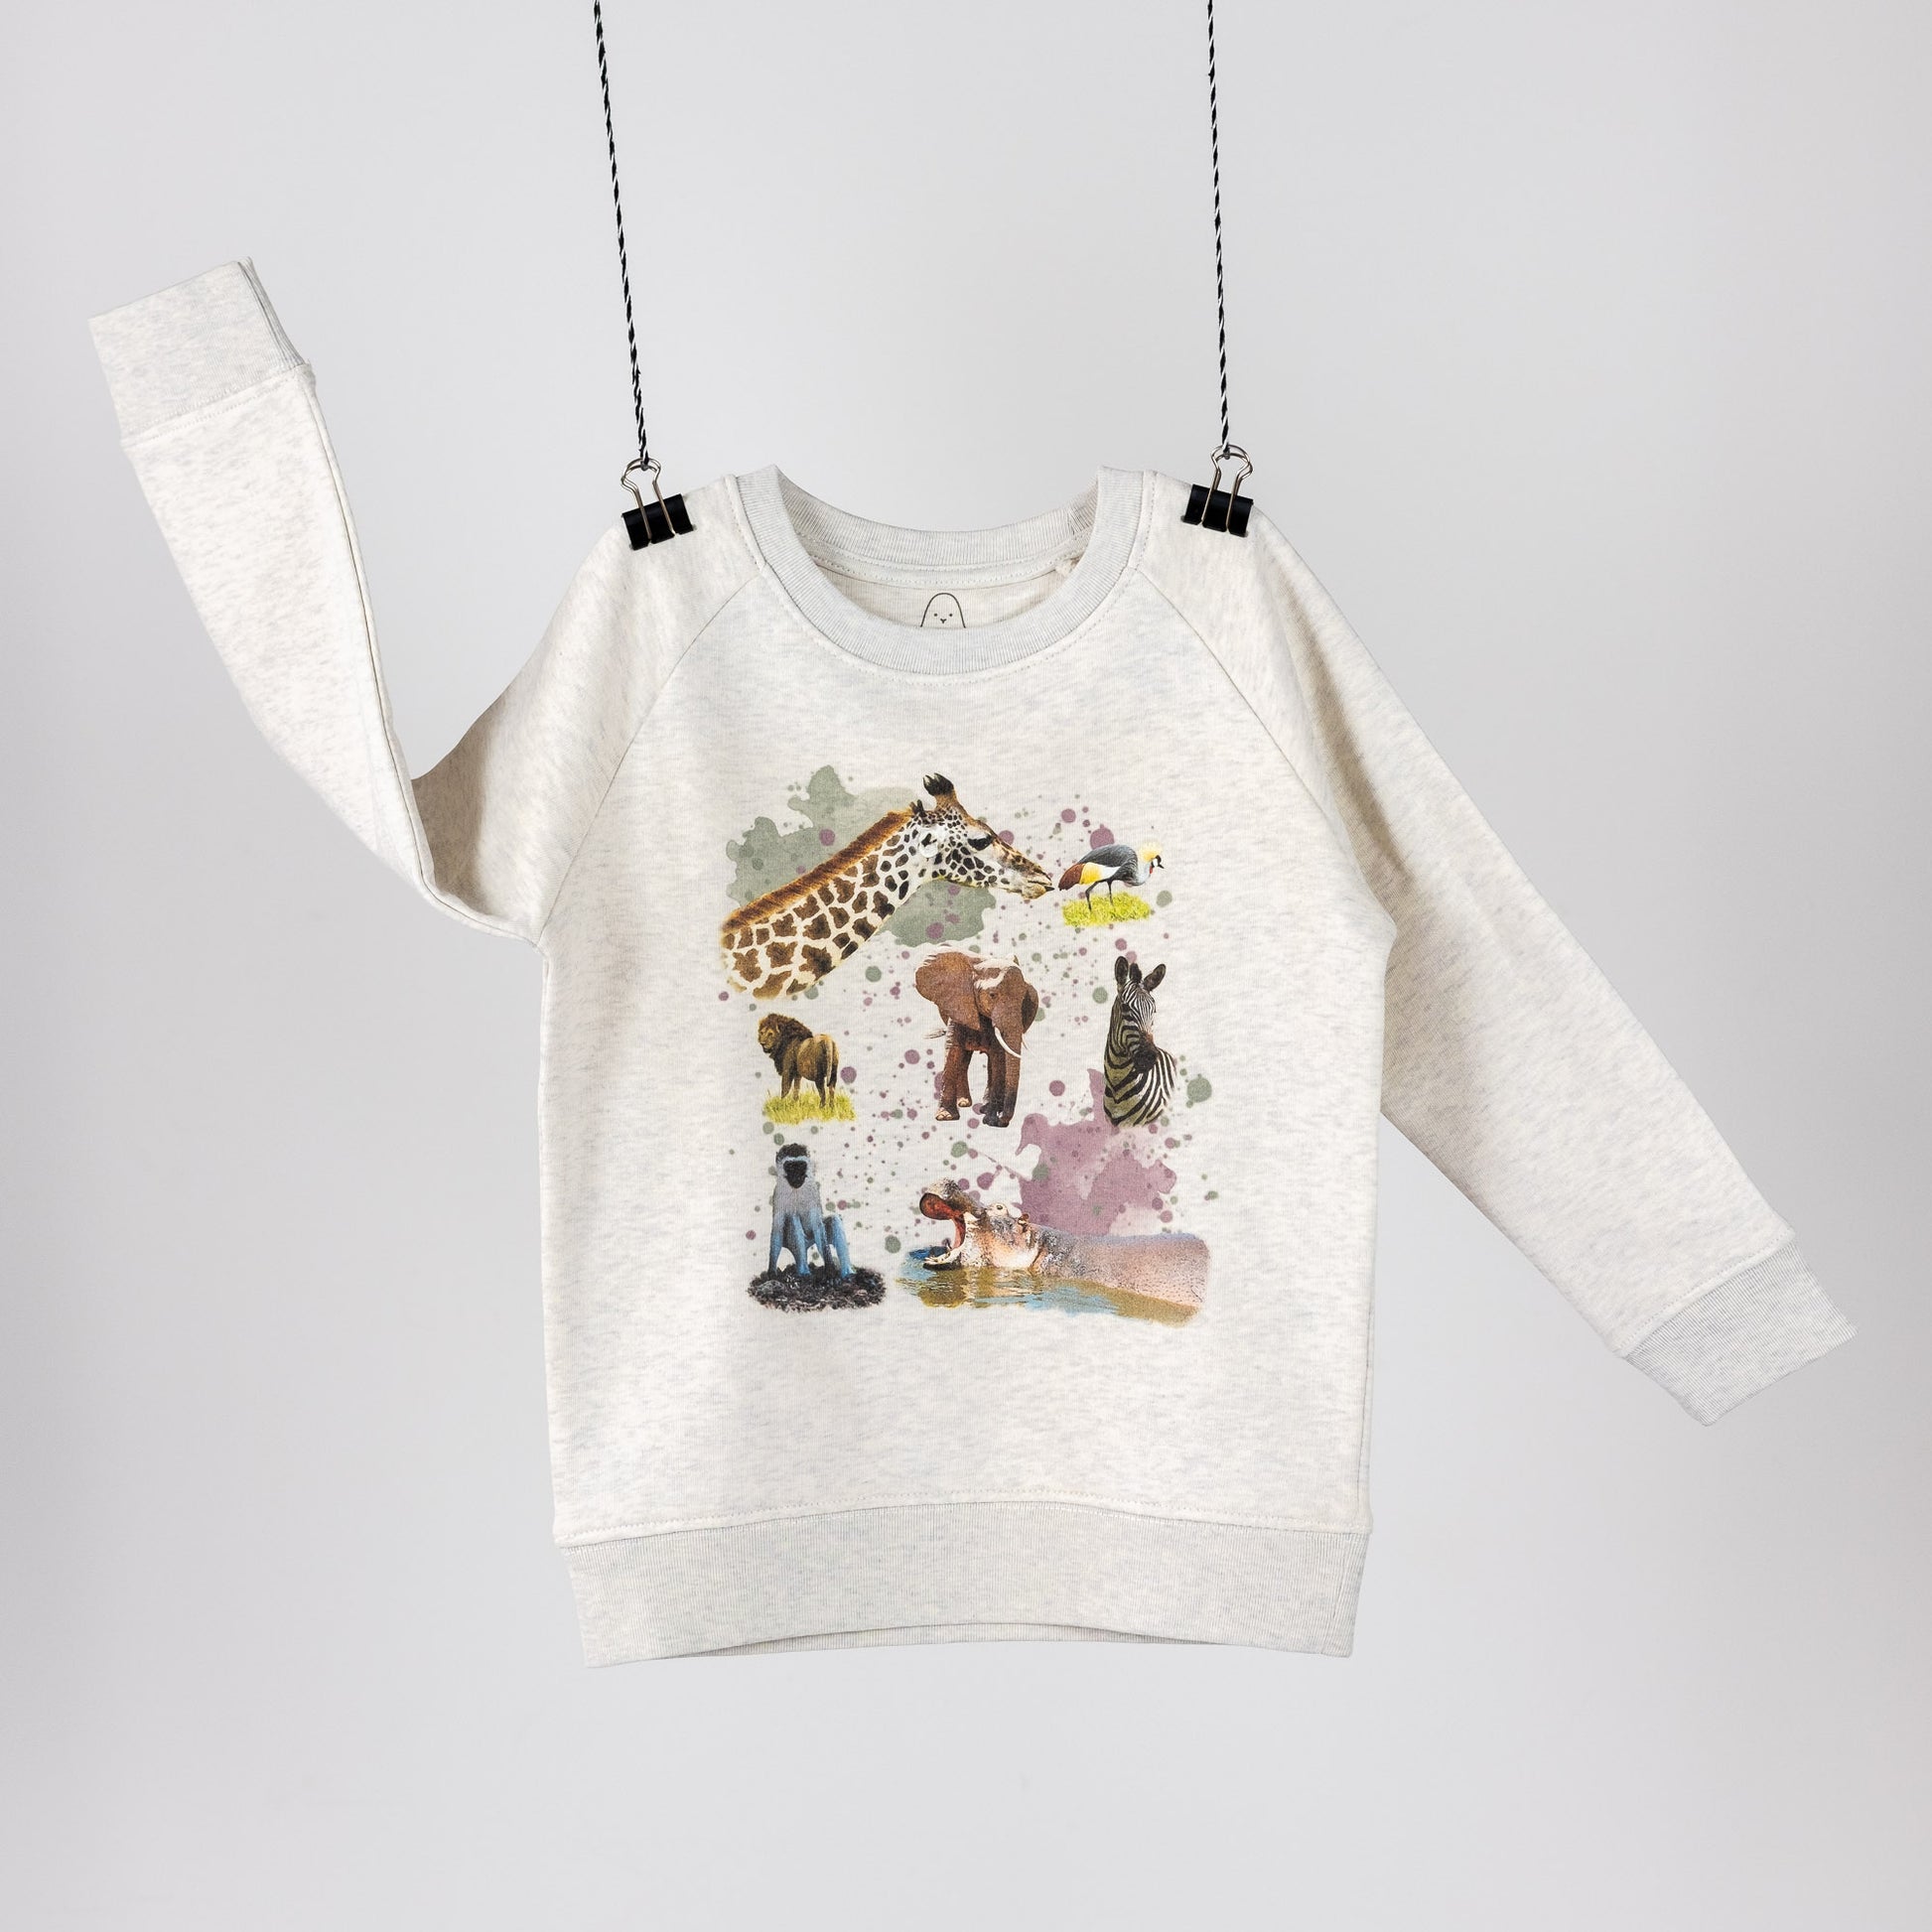 Heather grey terry sweatshirt for children. Featuring digital print with wild safari animals and paint splashes. Discrete logo printed in the neck. Front view 